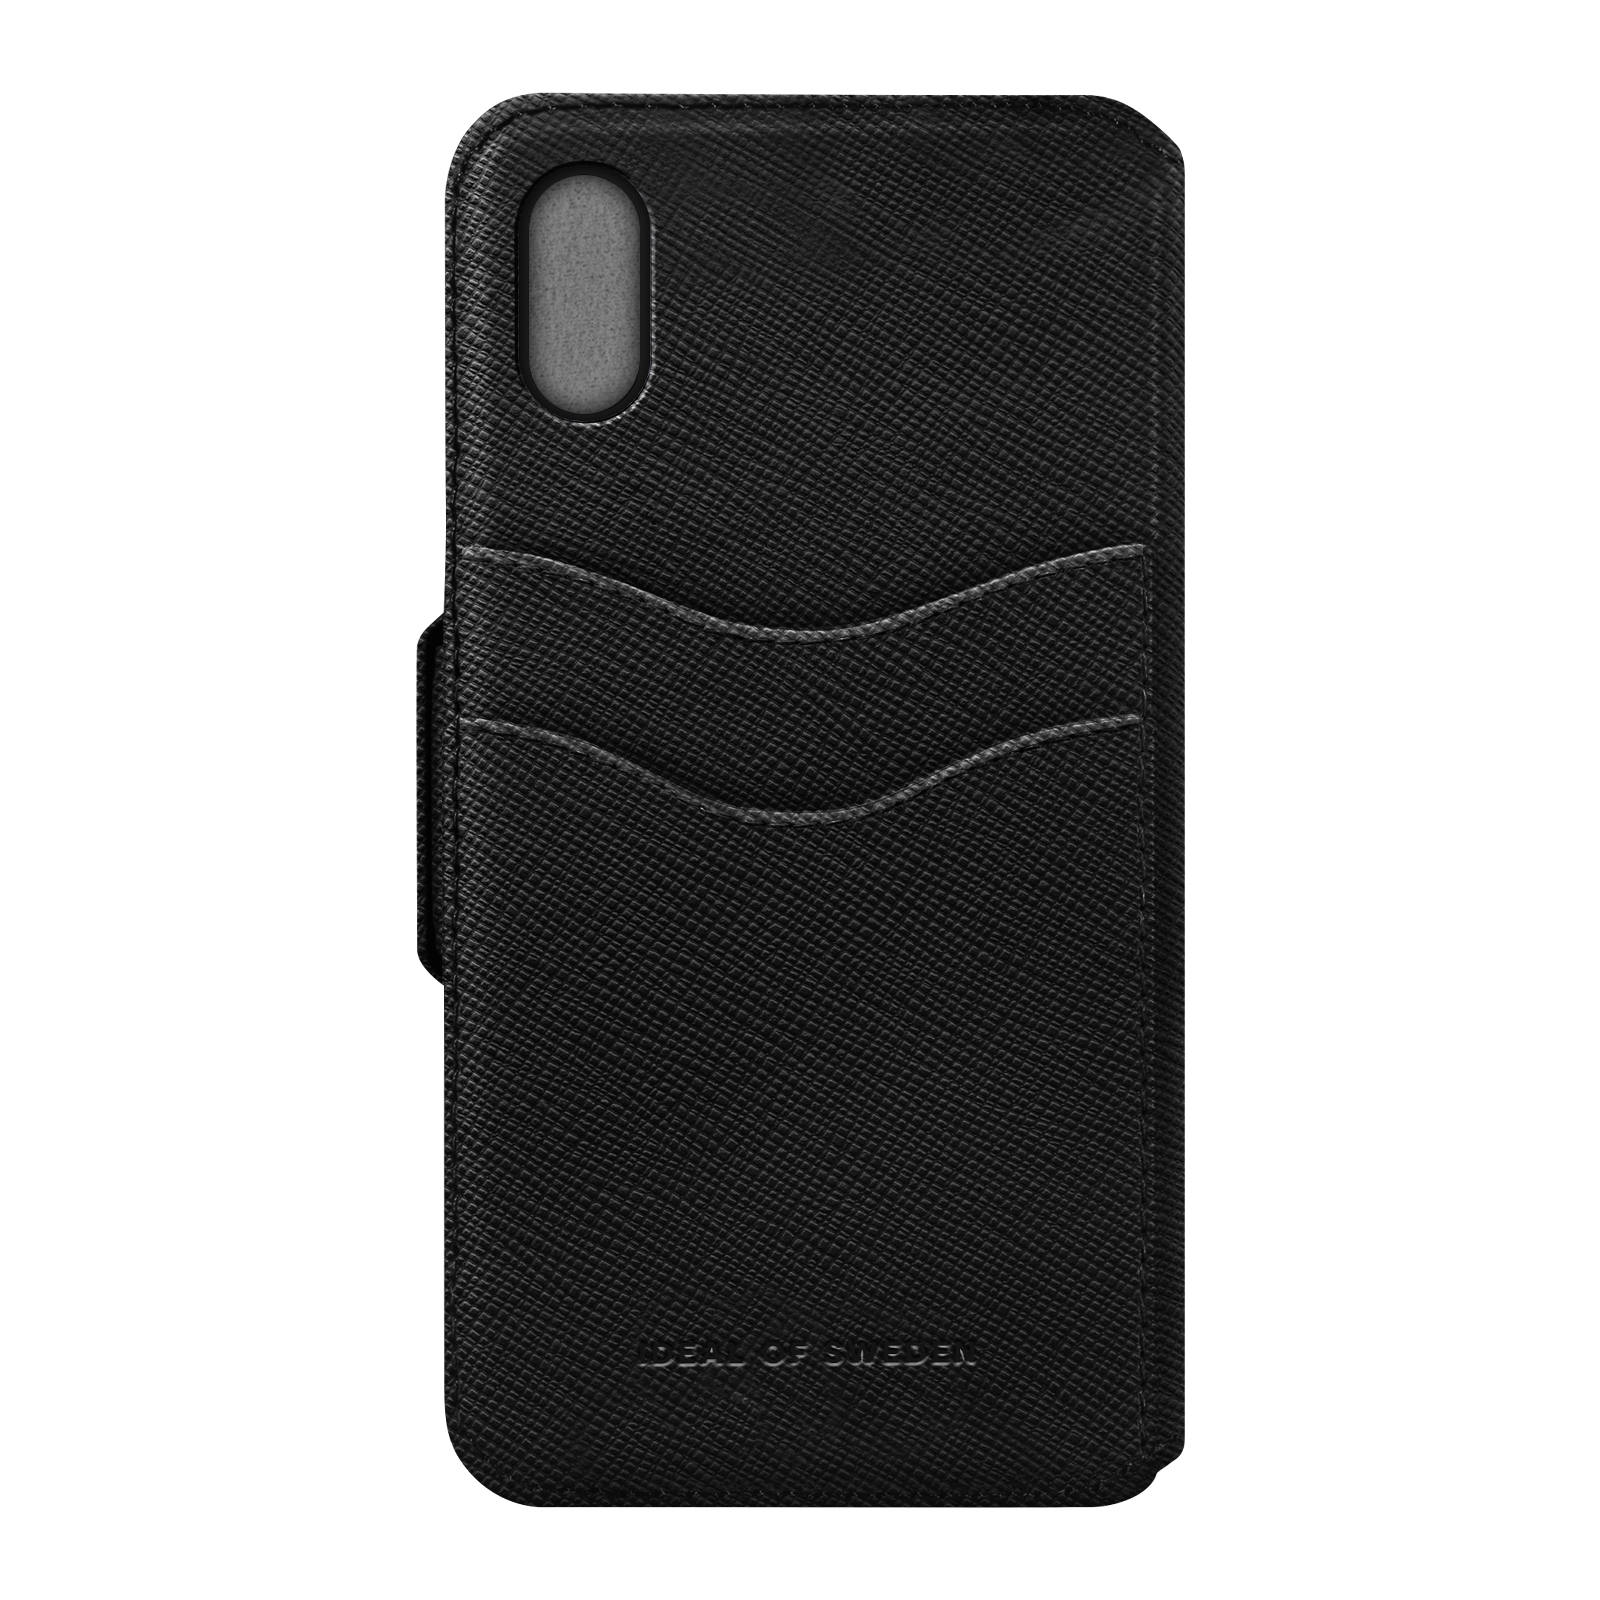 IDEAL OF SWEDEN IDFW-I8-01, Cover, iPhone Black Full Apple, iPhone X, XS